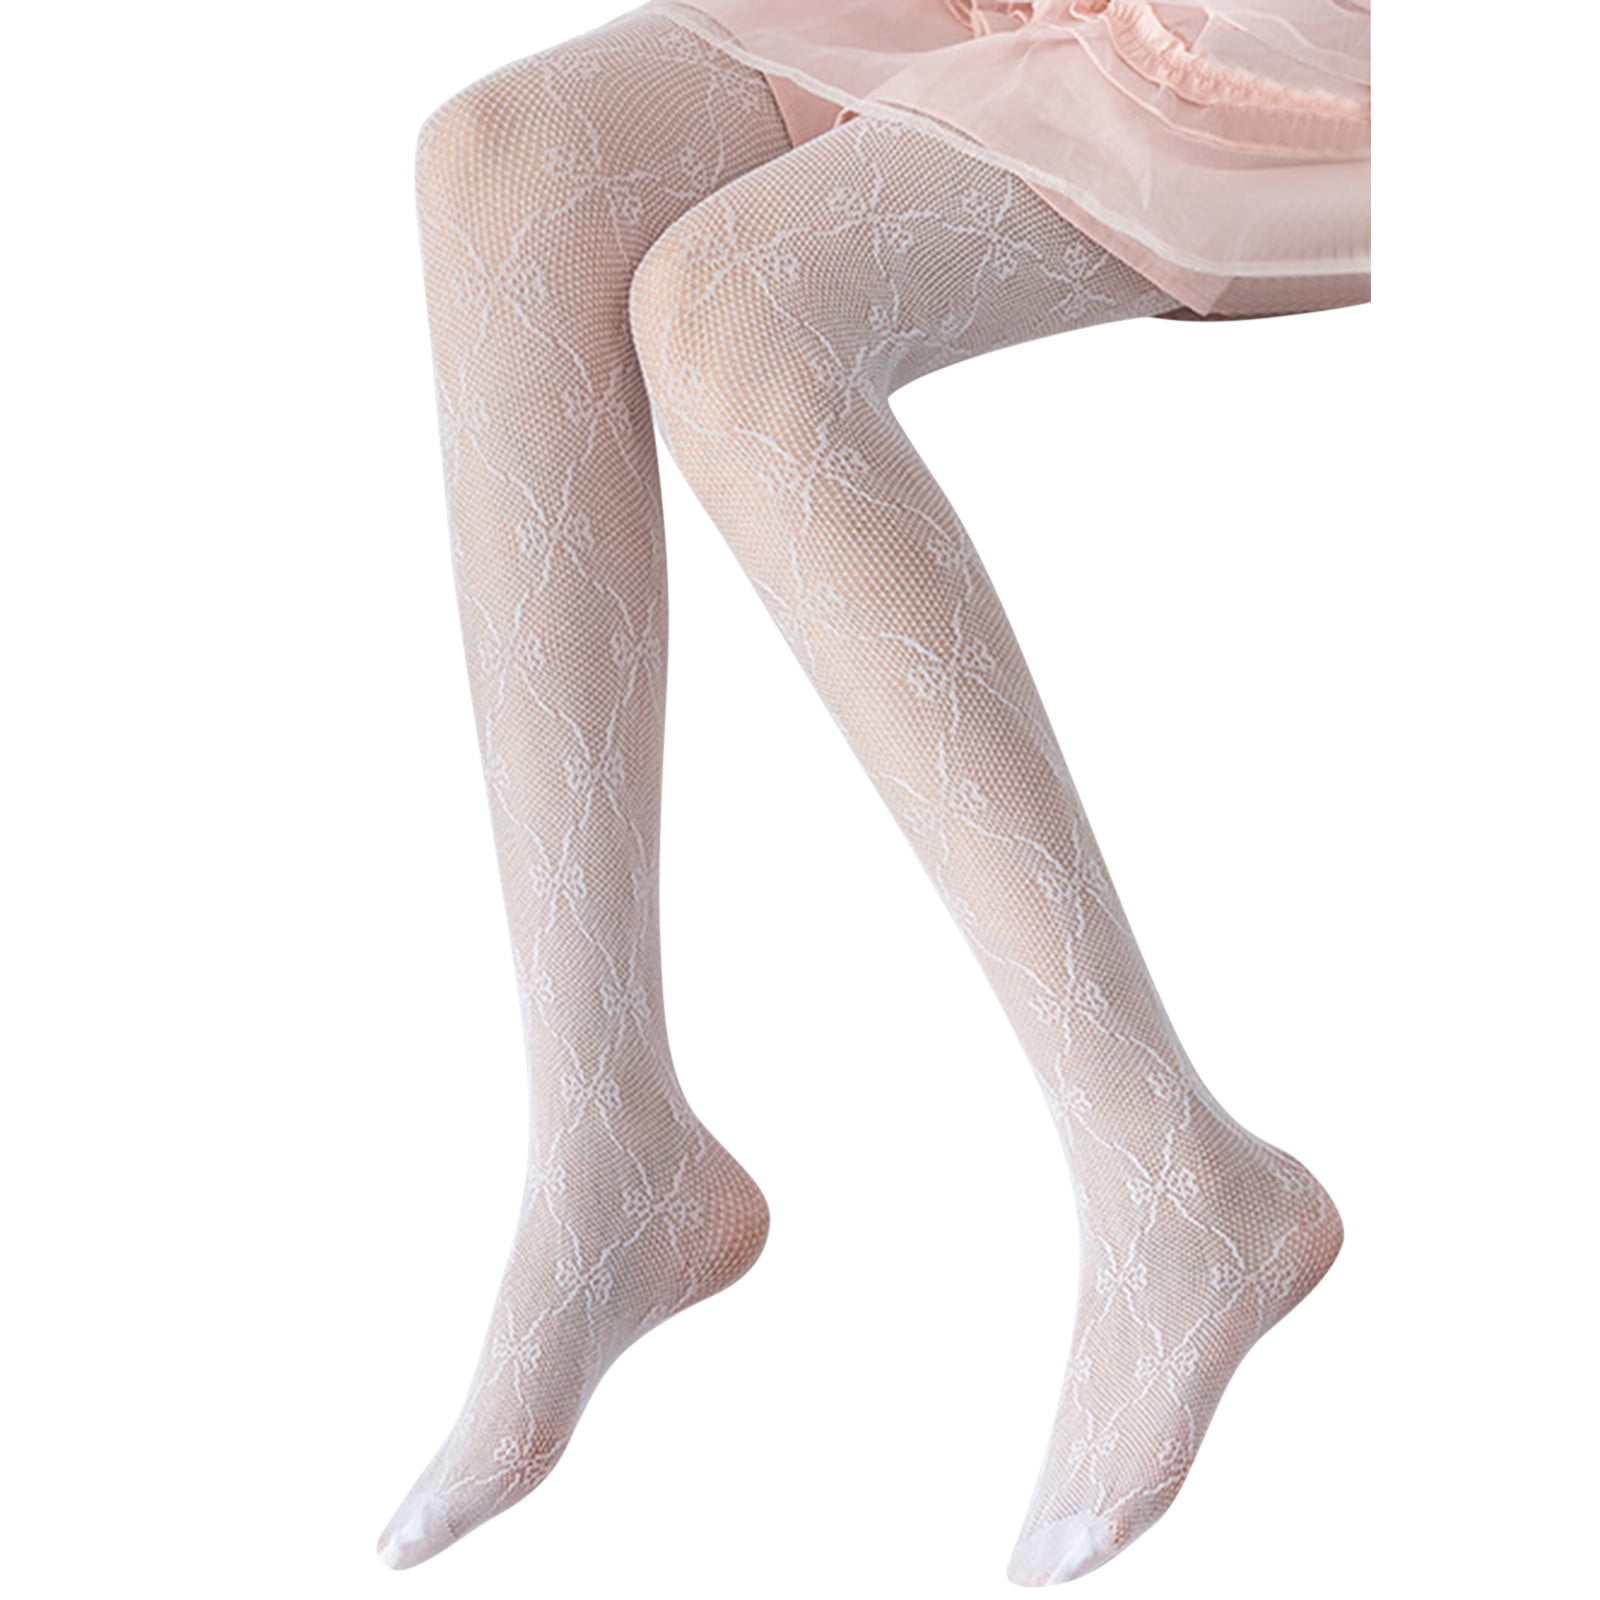 nsendm Lace Carved Retro Slim Tights Socks Transparent Stockings Women  Pantyhose Women Tights And Leggings to Wear under Dress Socks Navy One Size  